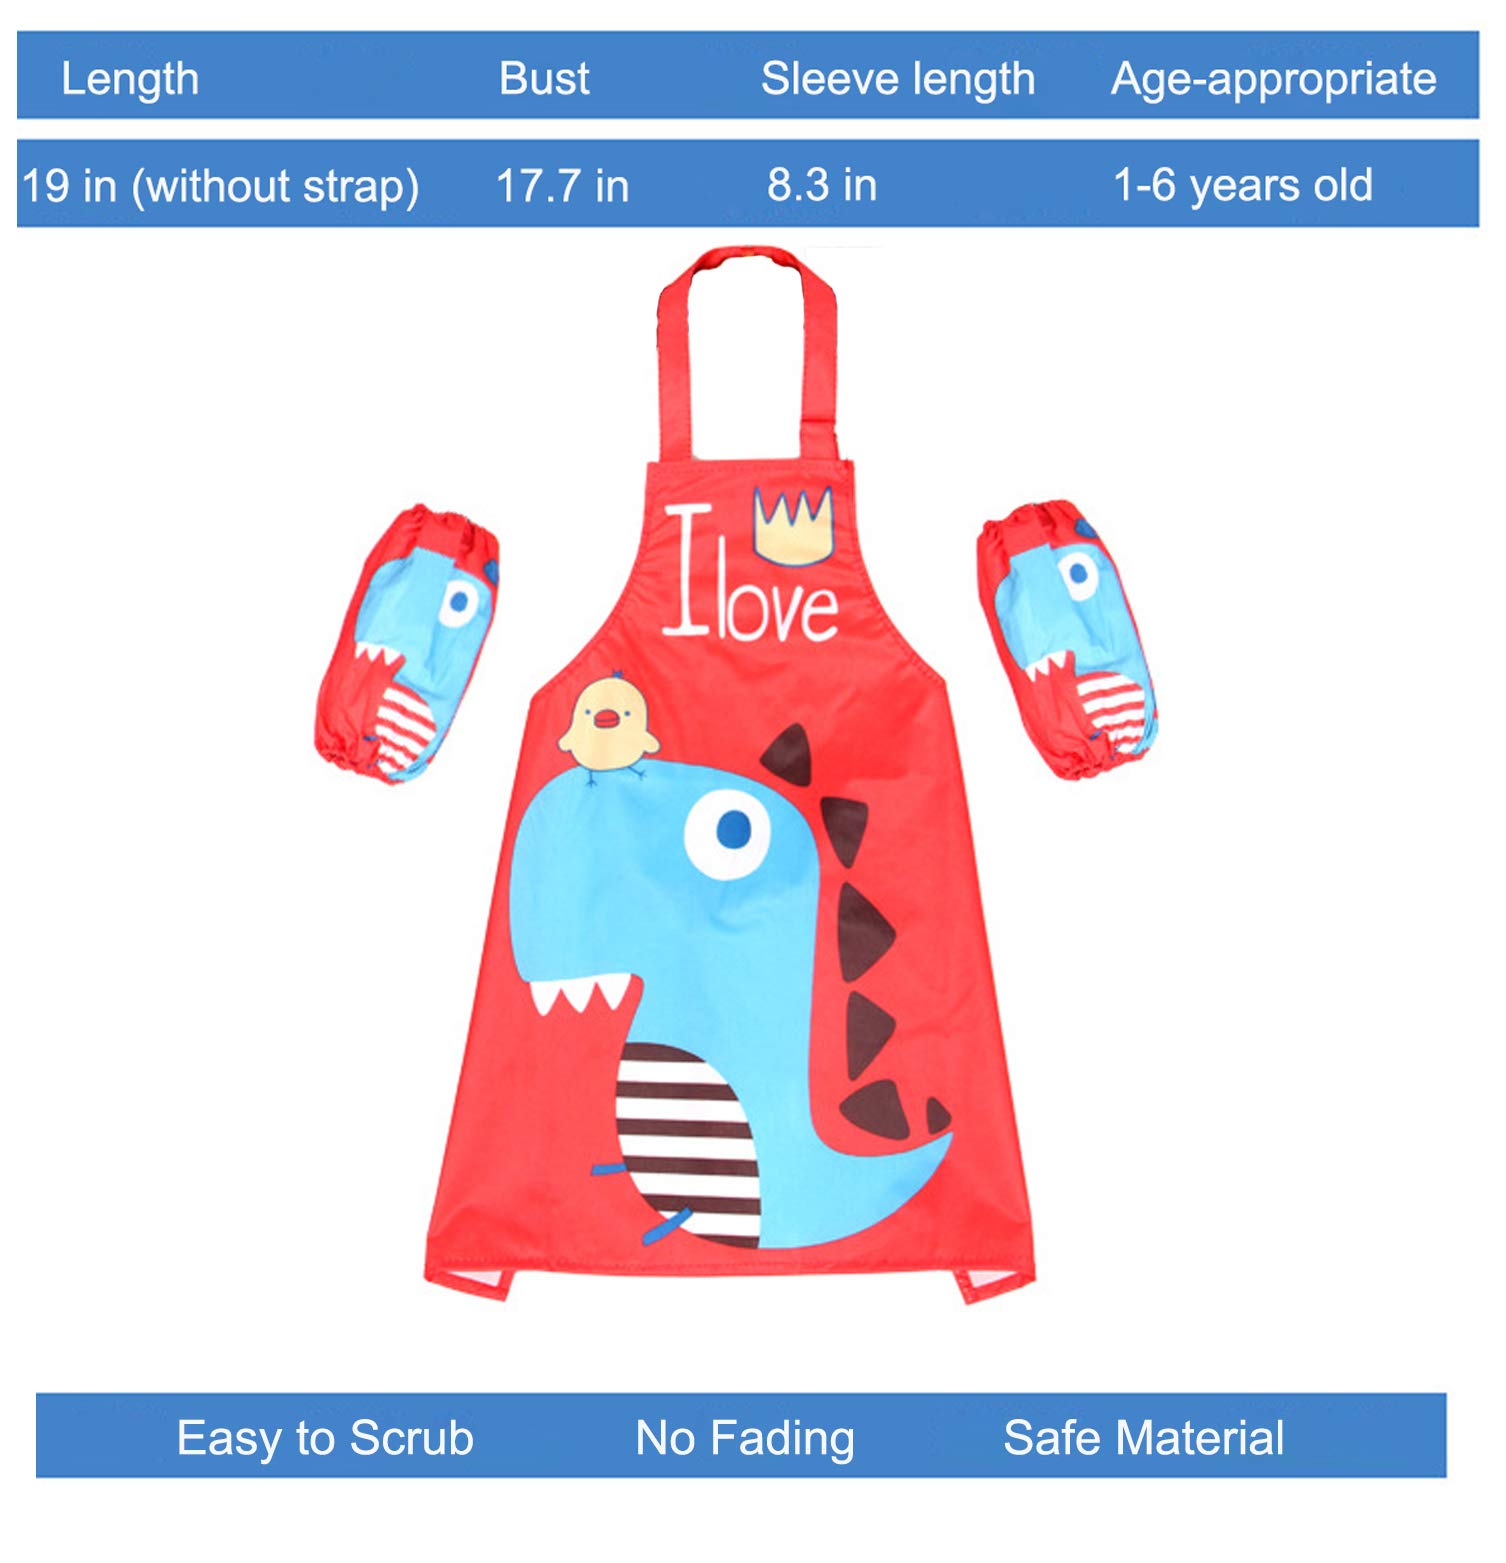 Kids Art Smocks,Adjustable Kids Apron,Children Waterproof Painting Aprons with 2 sleeves for Age 2-5 Years.